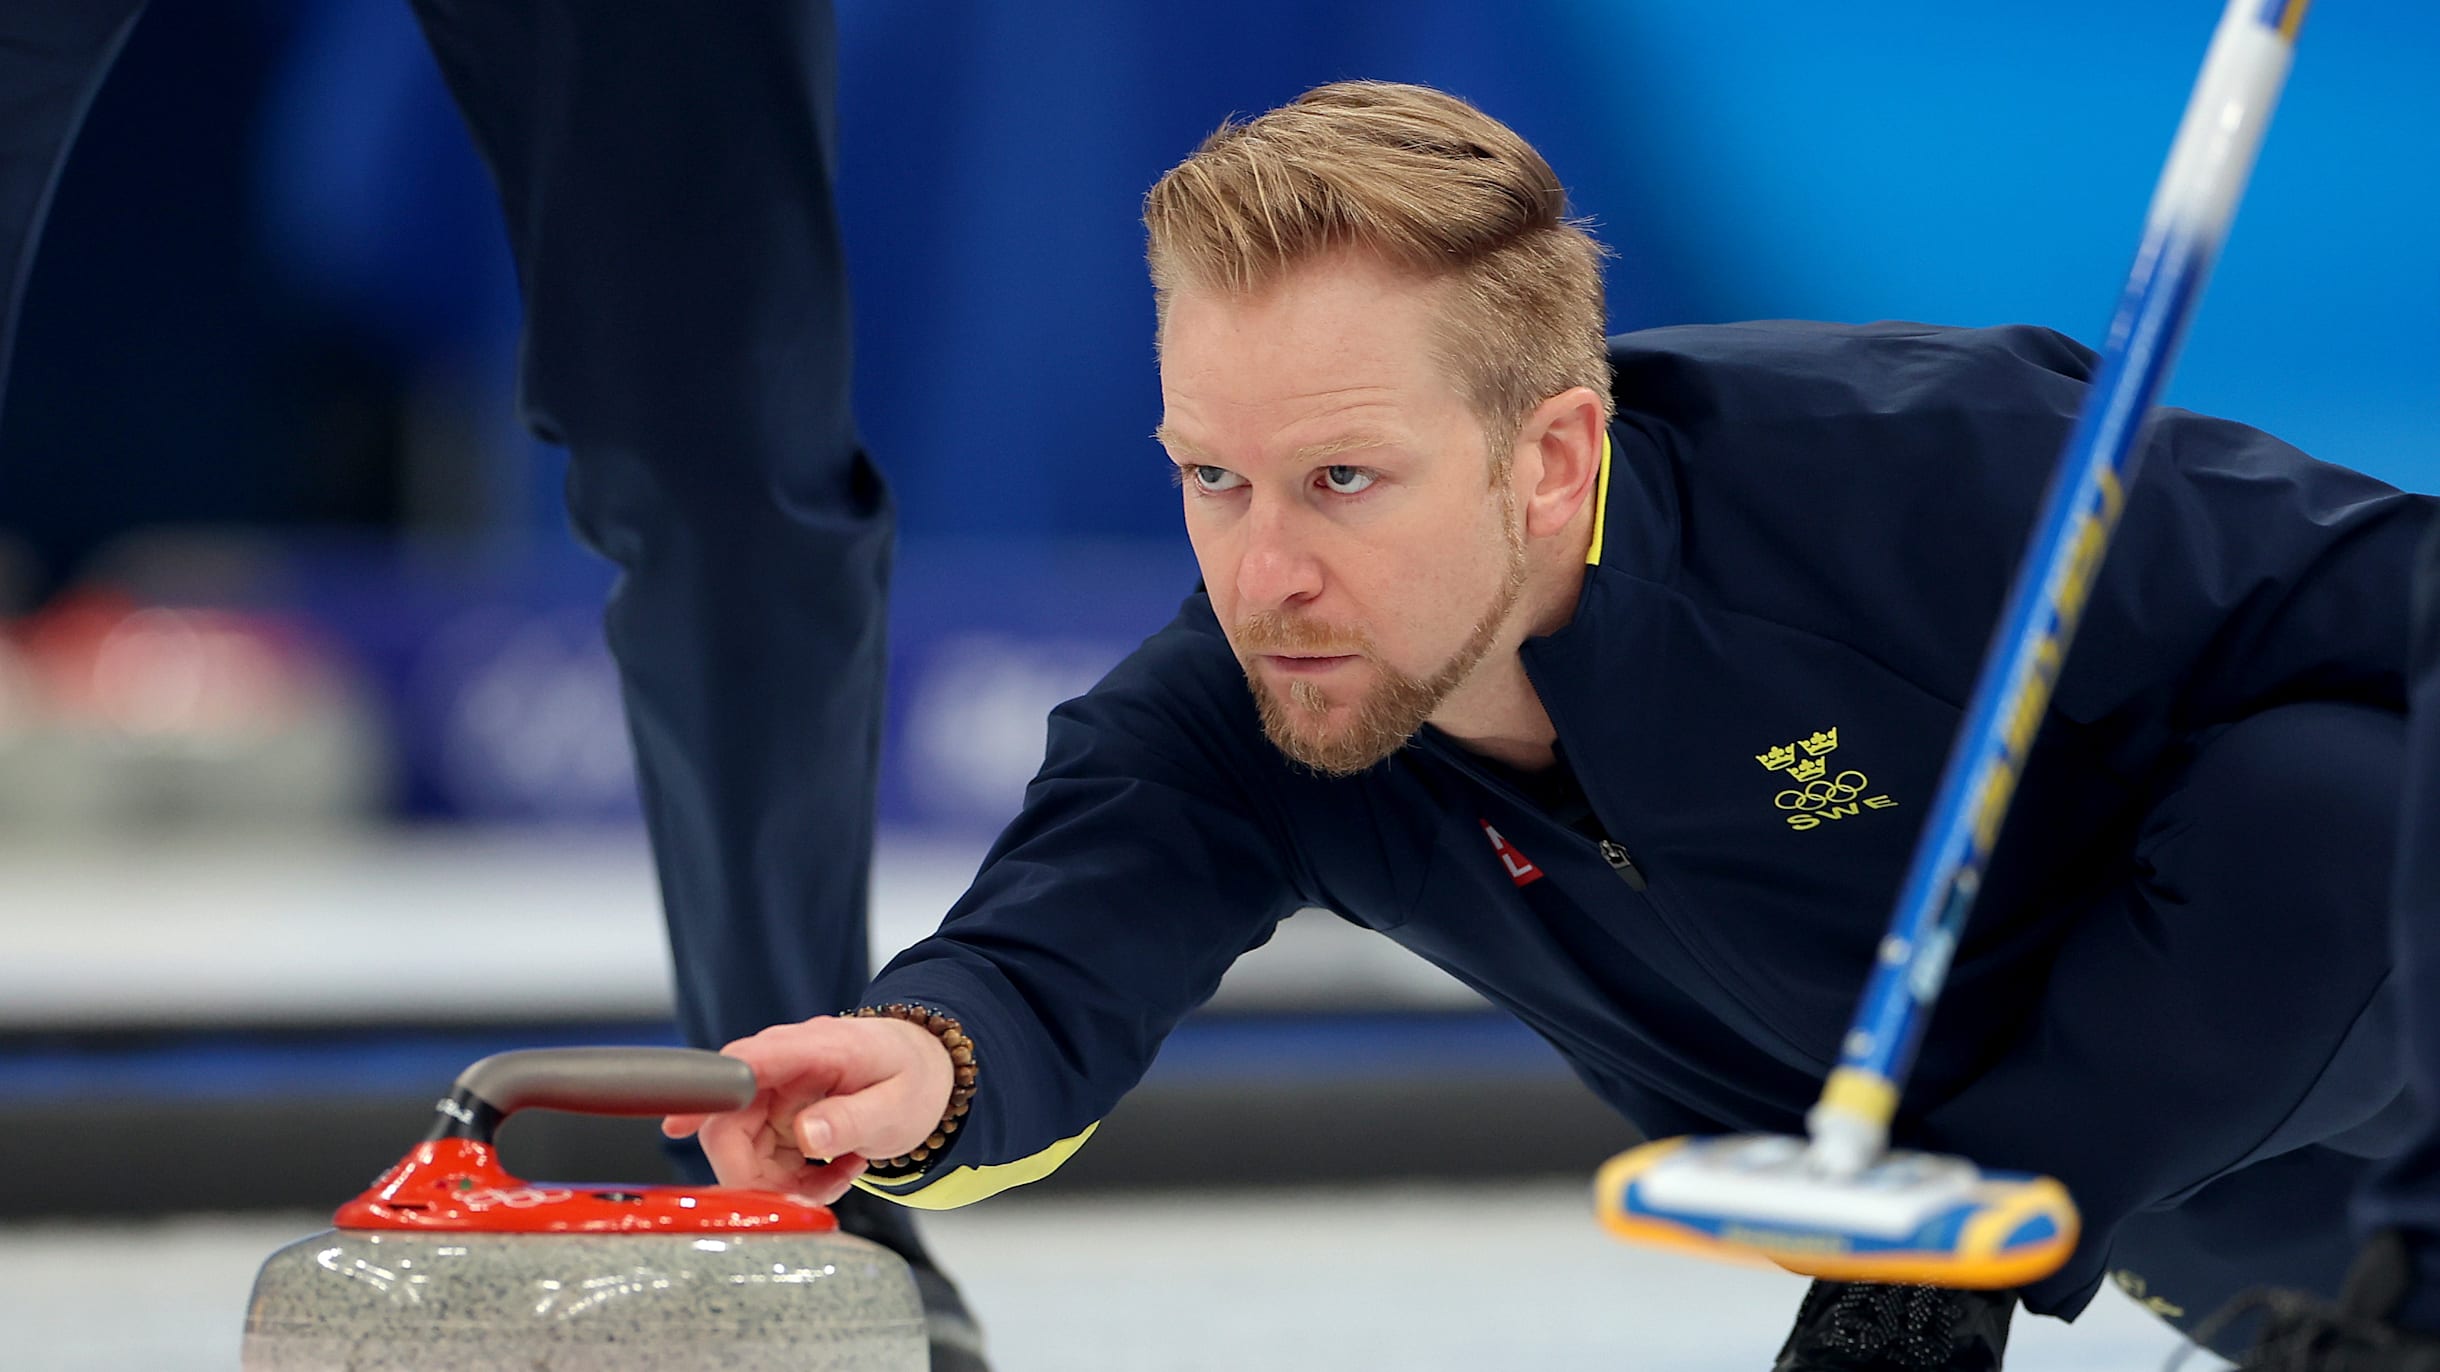 World Mens Curling Championship 2022 Preview, stories, schedule, and stars to watch